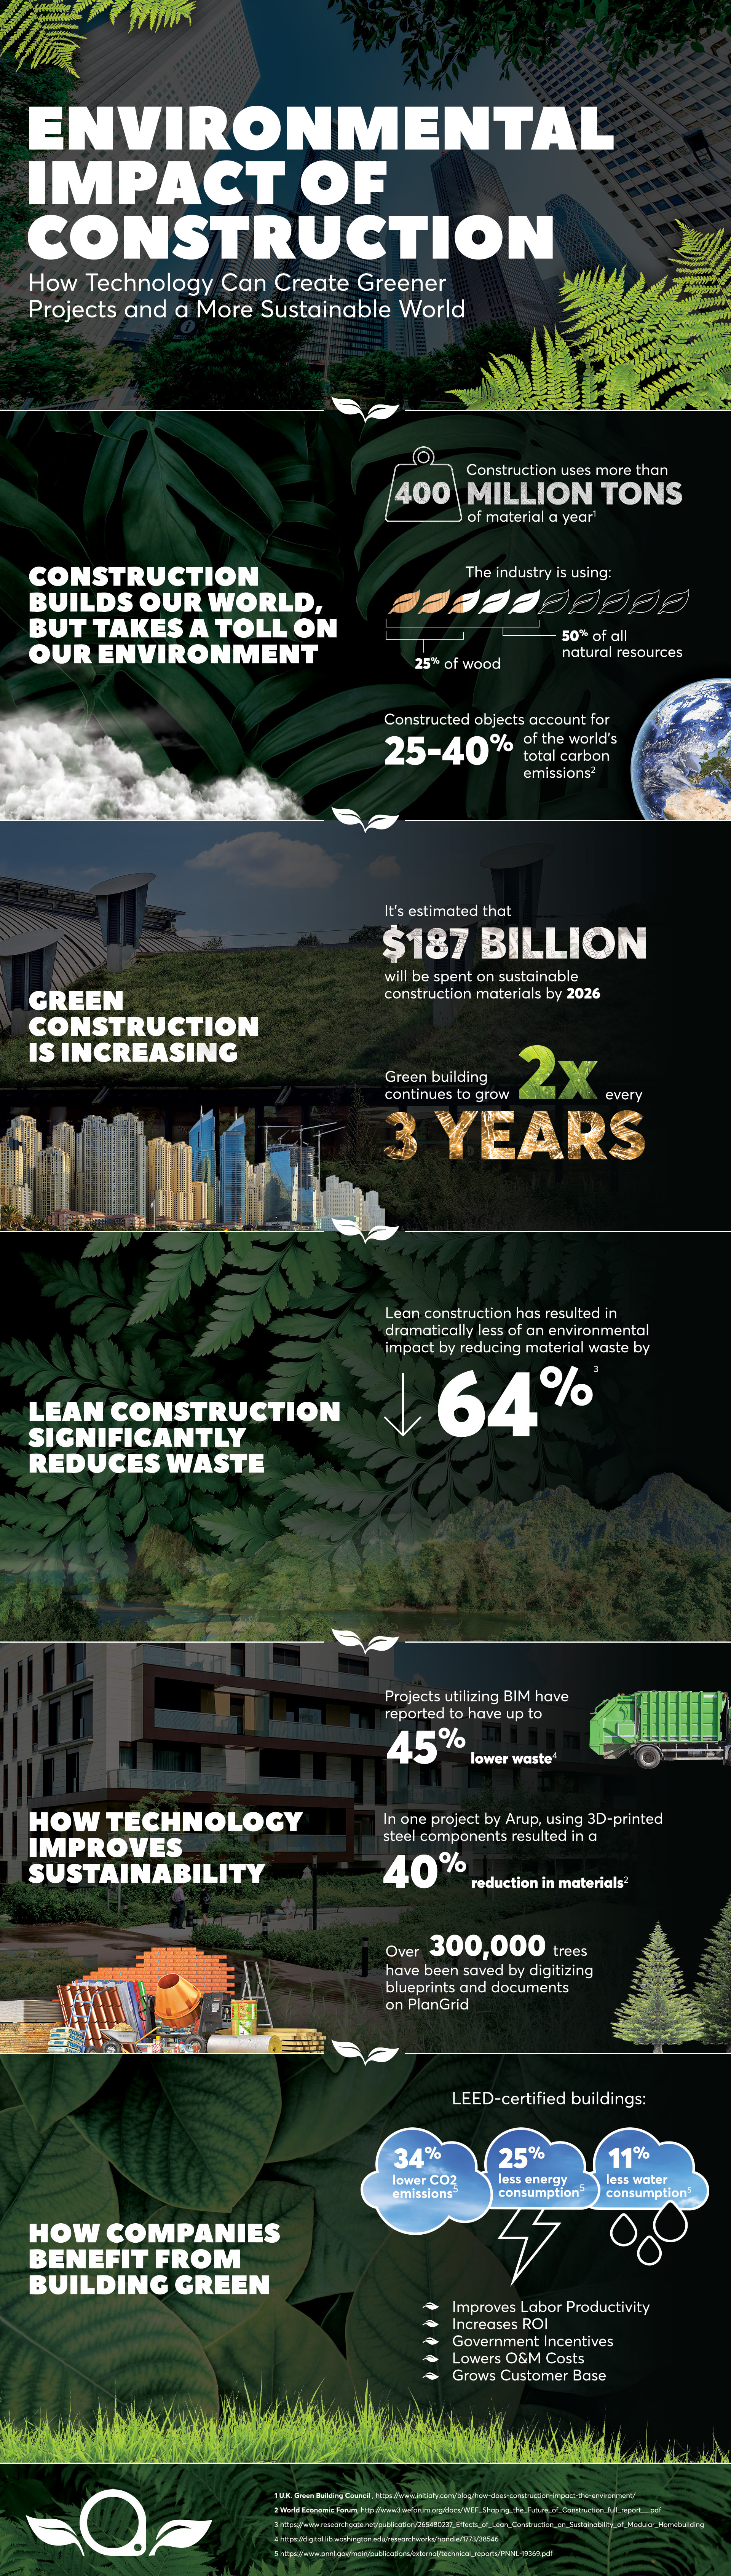 The environmental impact of construction - green building